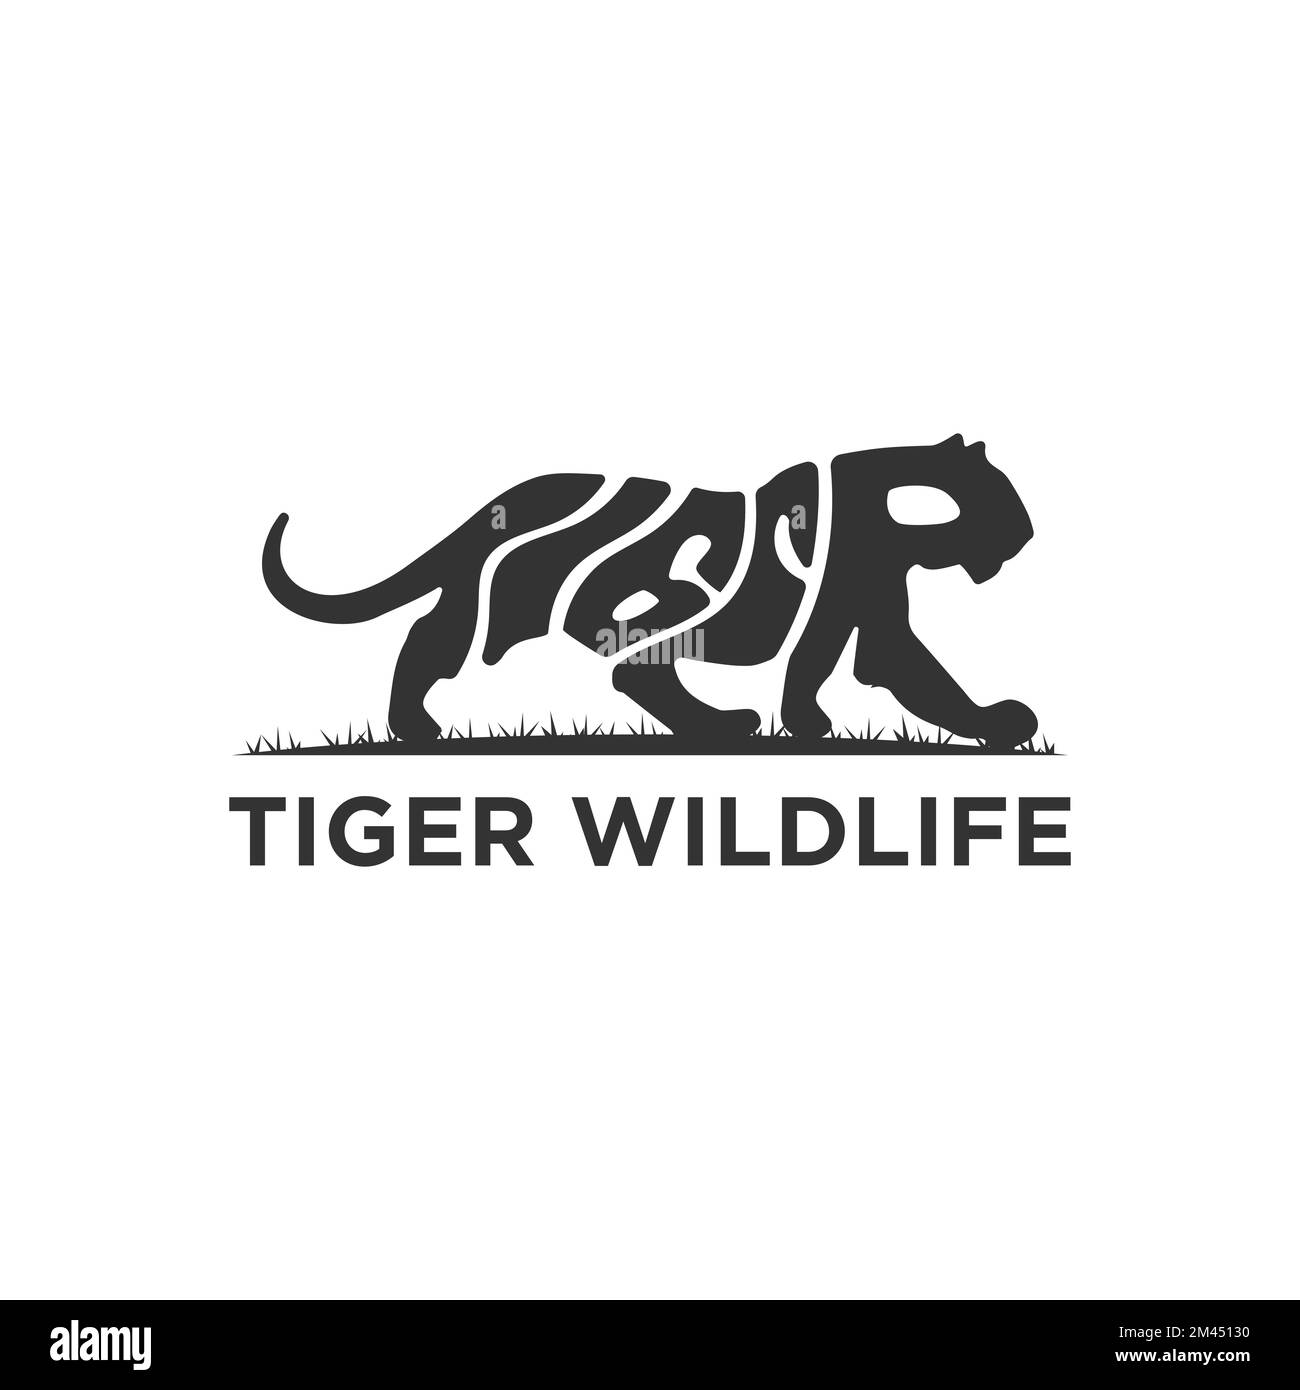 Tiger Wildlife animal logo design vector, icon with Warp Text Into the Shape of a Tiger animal illustration Stock Vector